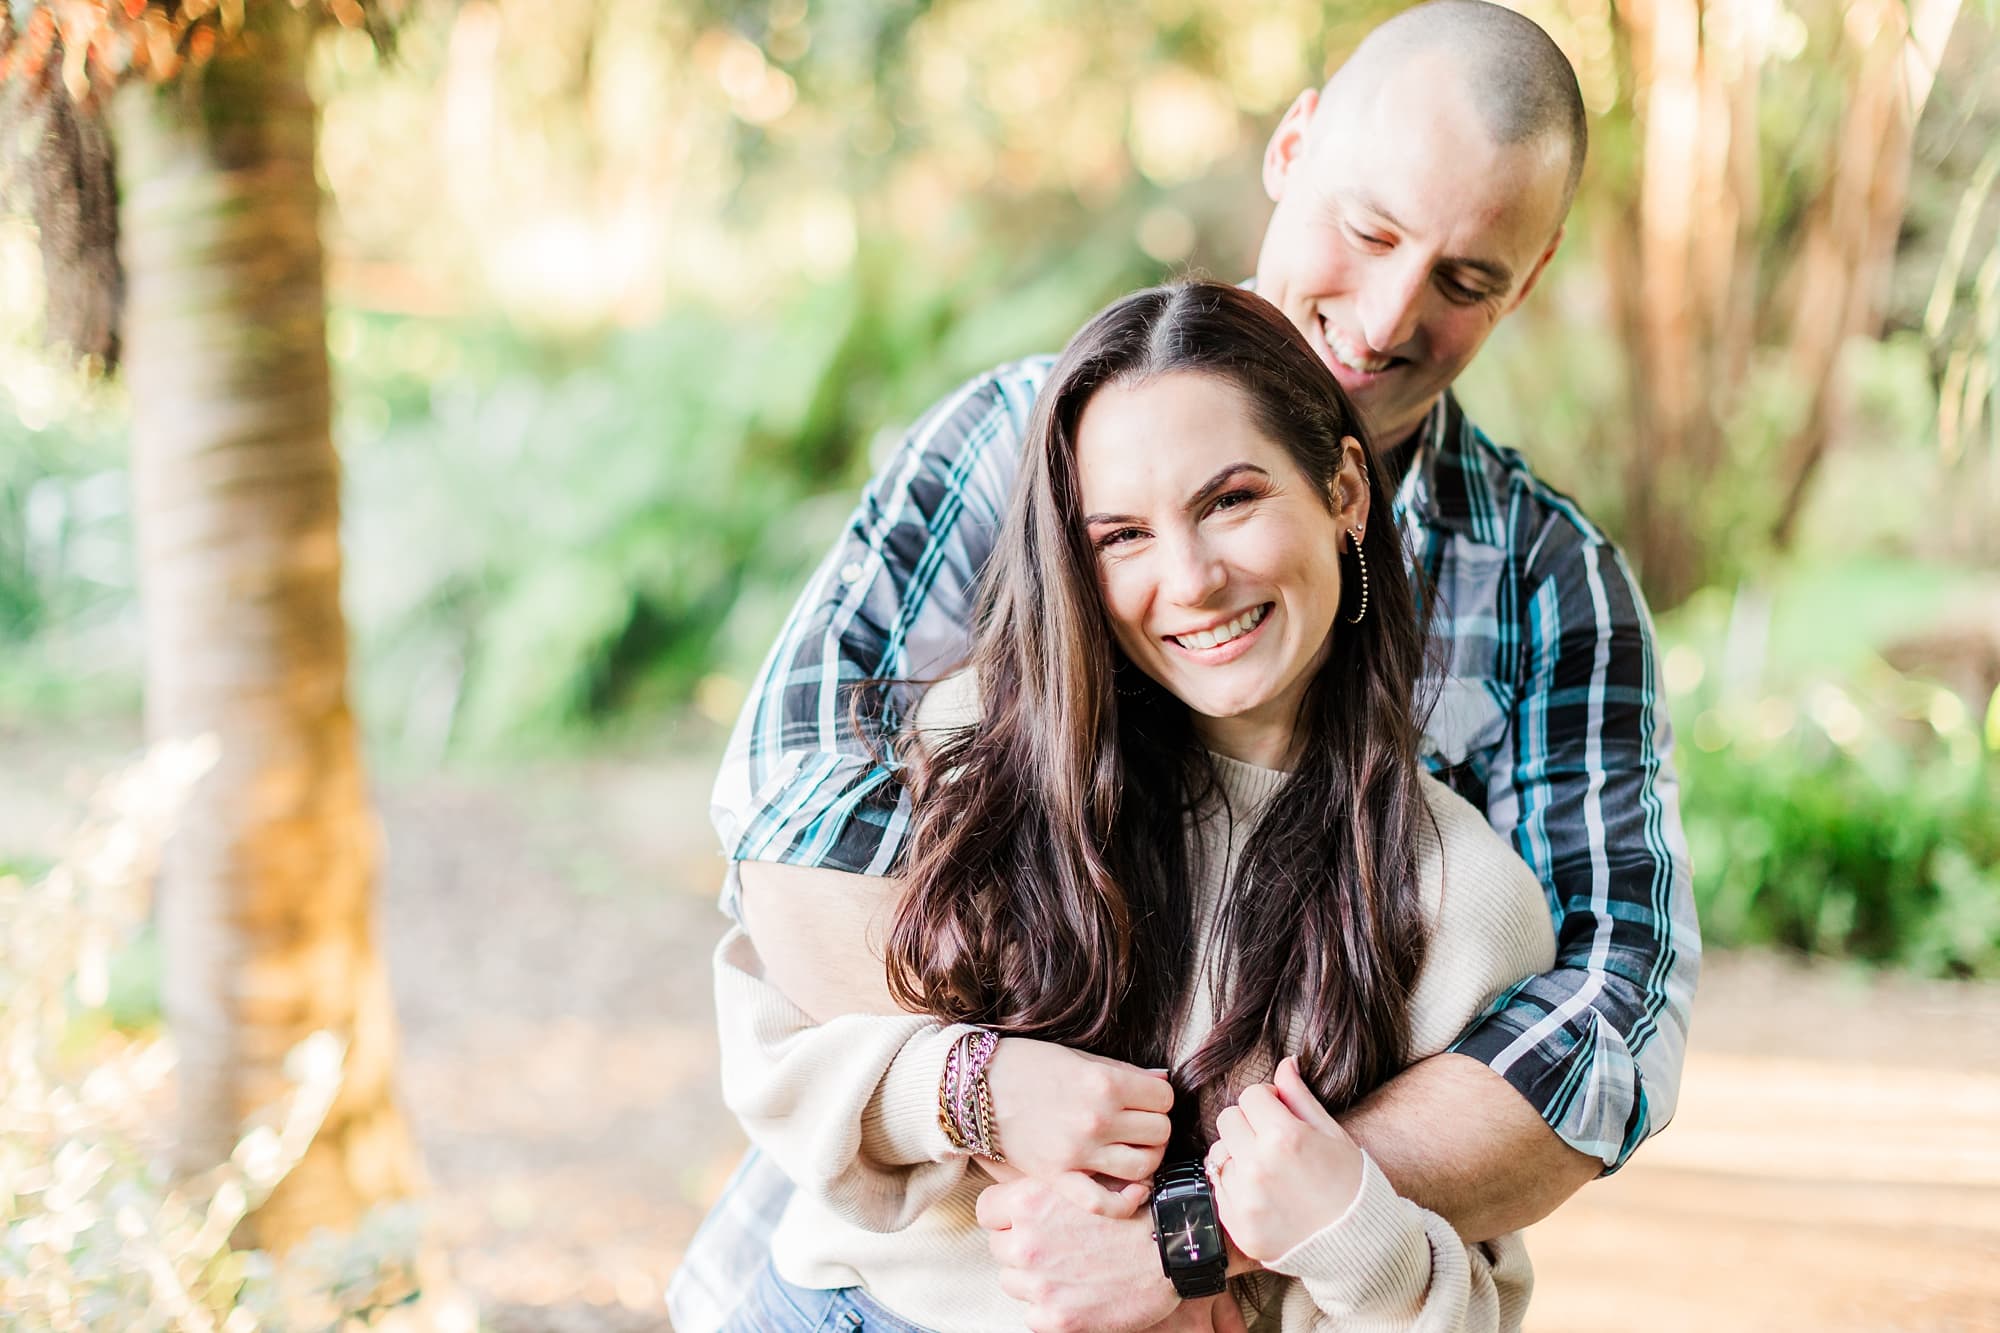 sneak attack pose at engagement session